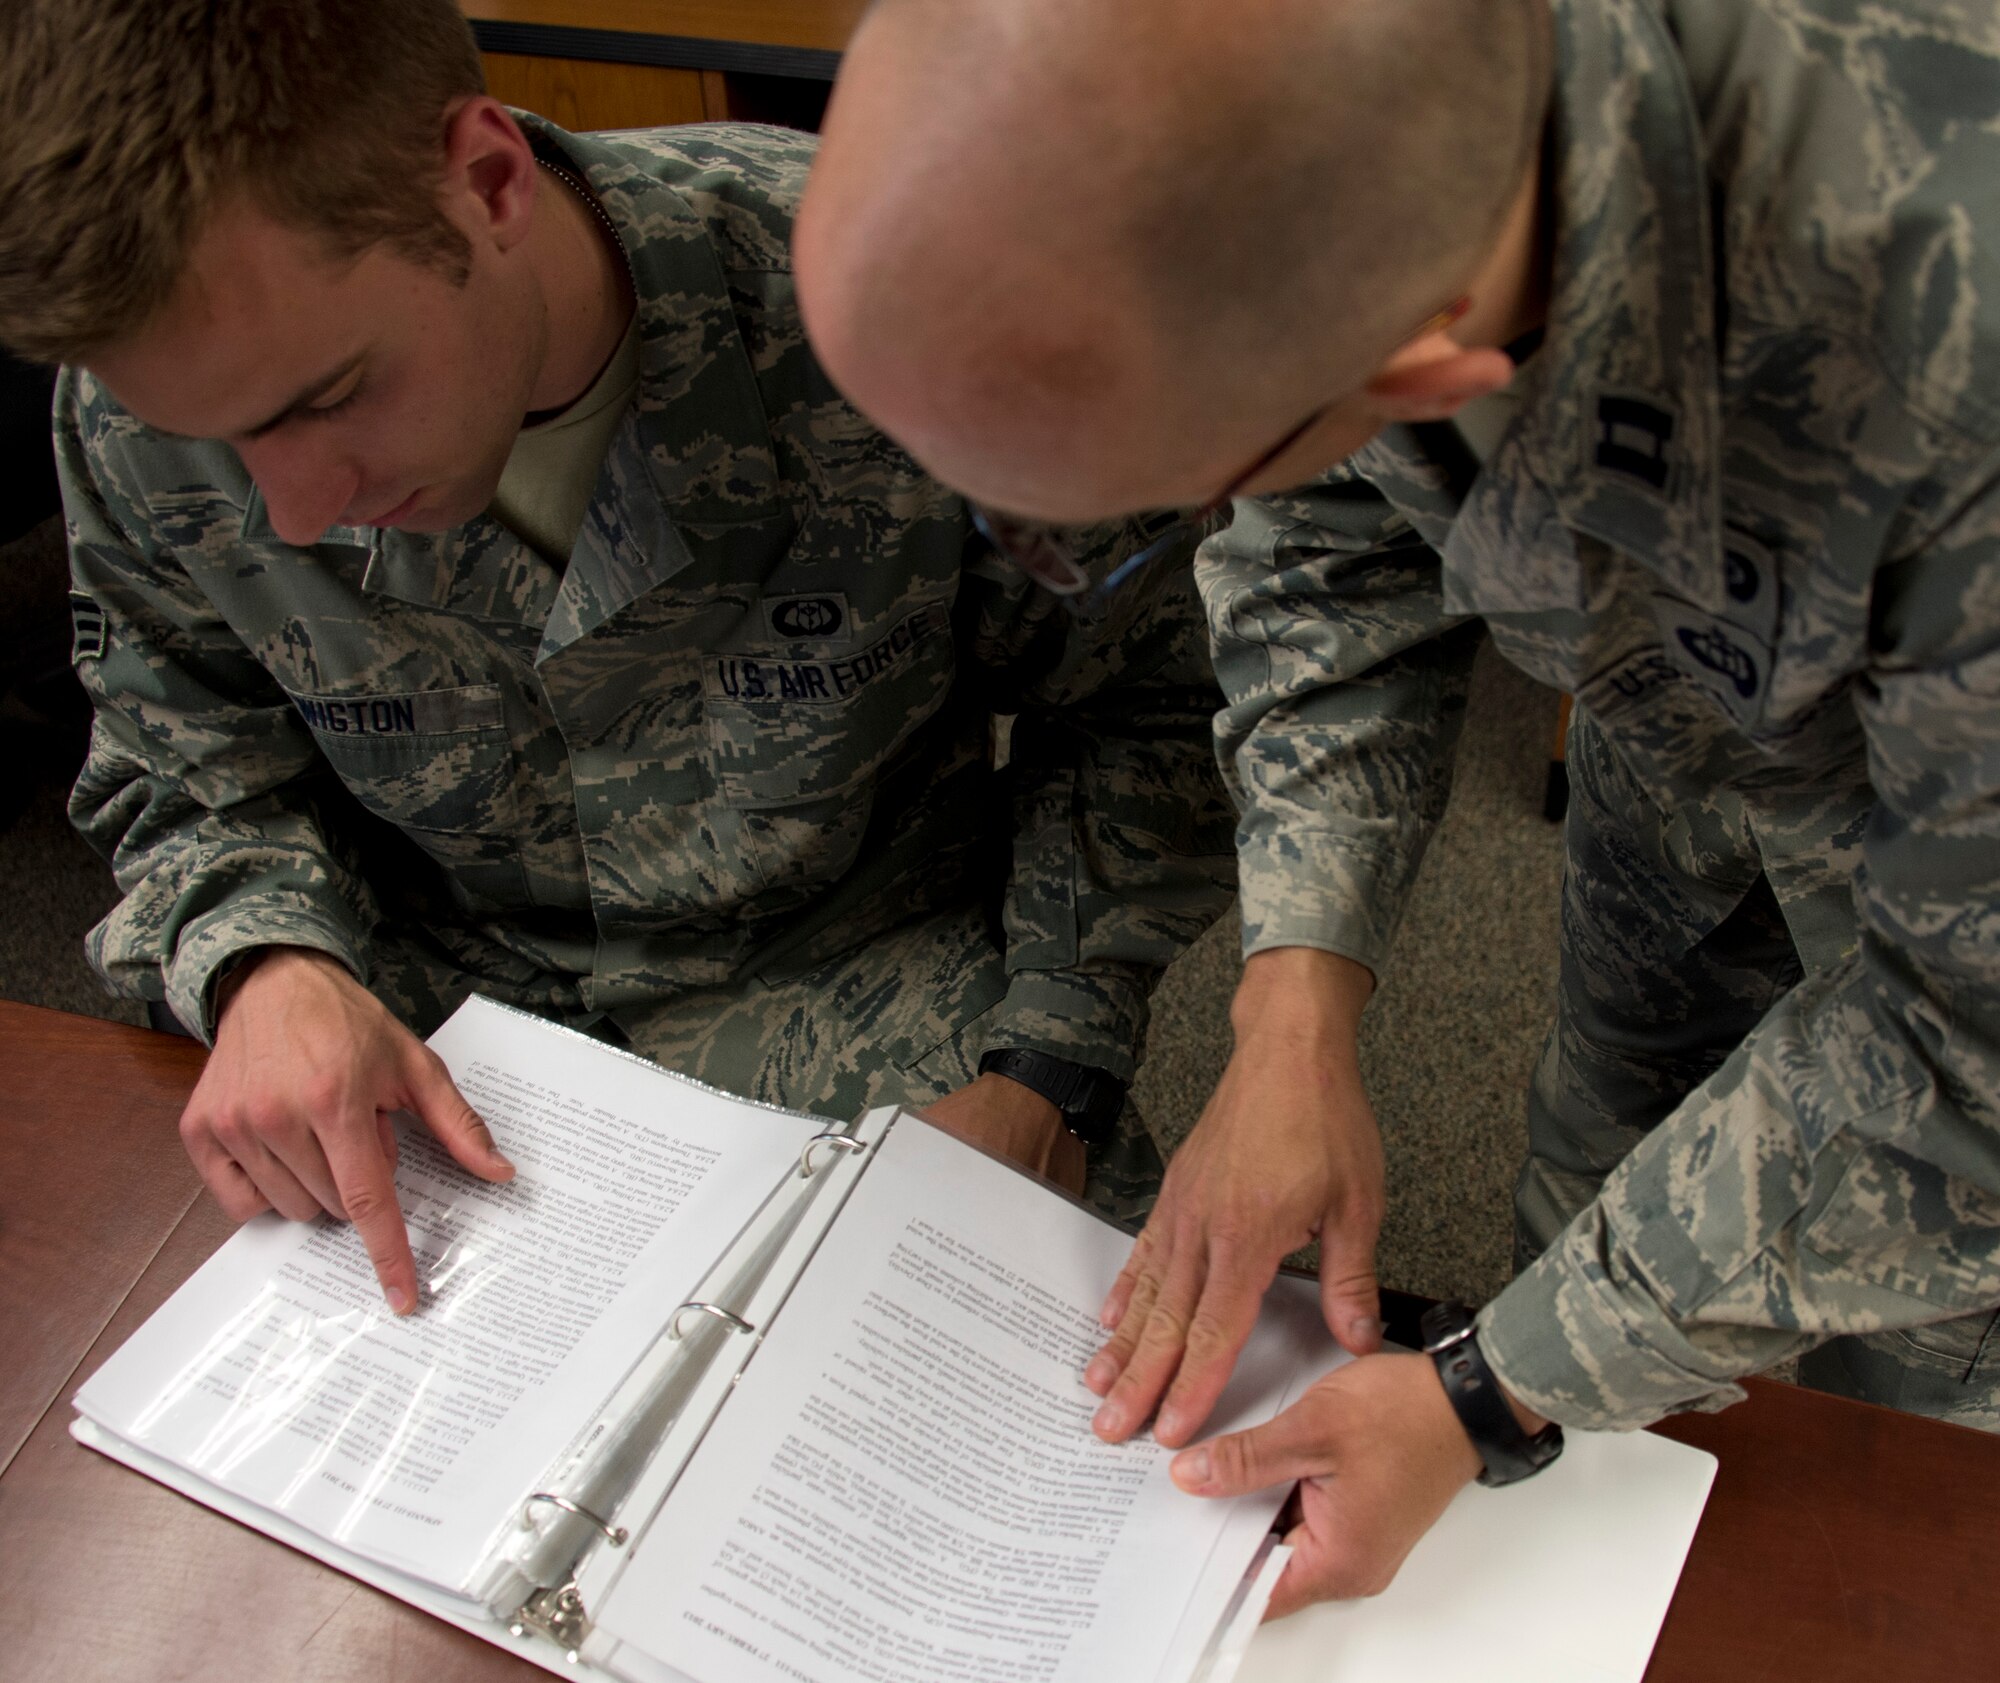 U.S. Air Force Capt. Allen Thill, right, assists Senior Airman Timothy Wigton with finding information in an Air Force Instruction manual in Little Falls, Minn., June 12, 2014. Wigton is in the last phase of his upgrade skill training during which he was evaluated on his knowledge of weather. 

(U.S. Air National Guard photo by Tech. Sgt. Amy M. Lovgren/Released)